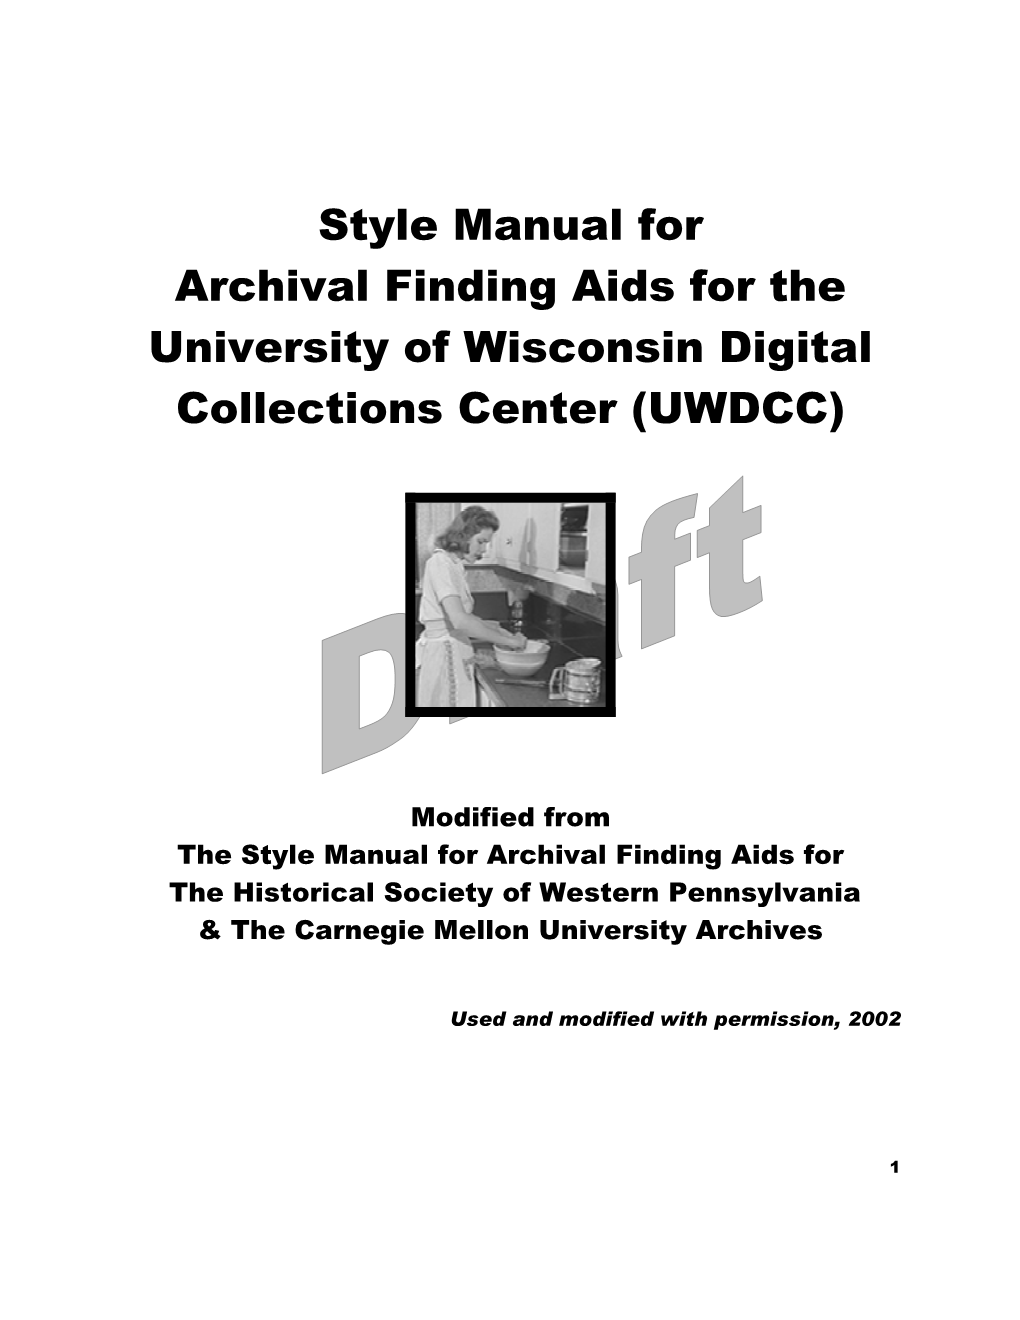 Style Manual for Archival Finding Aids for the University of Wisconsin Digital Collections Center (UWDCC)